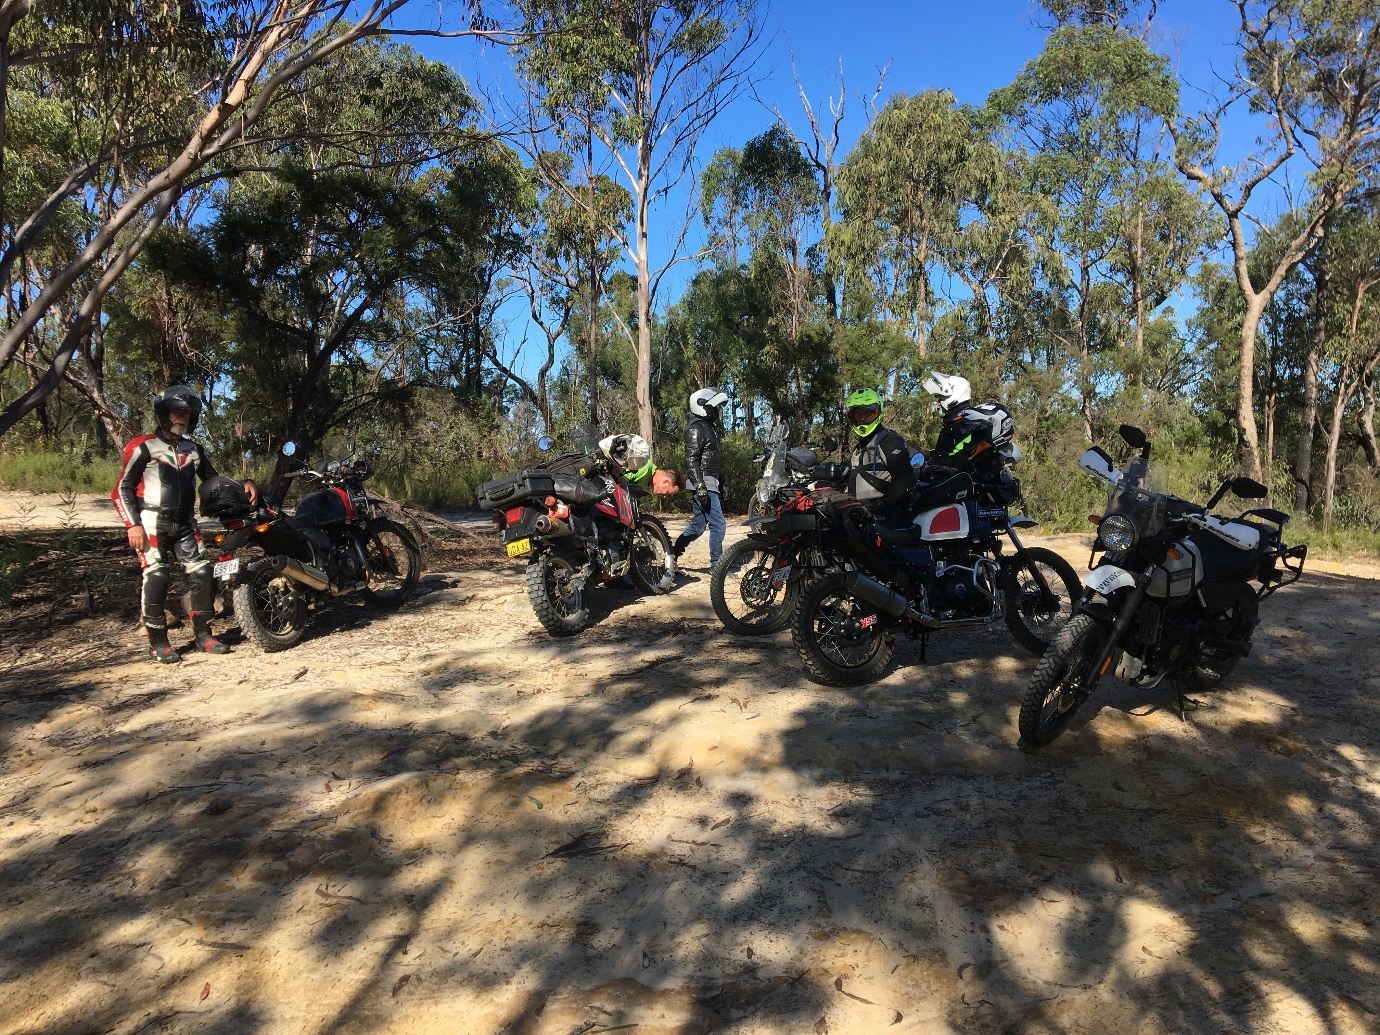 A group of motorcycles parked on a dirt road

Description automatically generated with low confidence